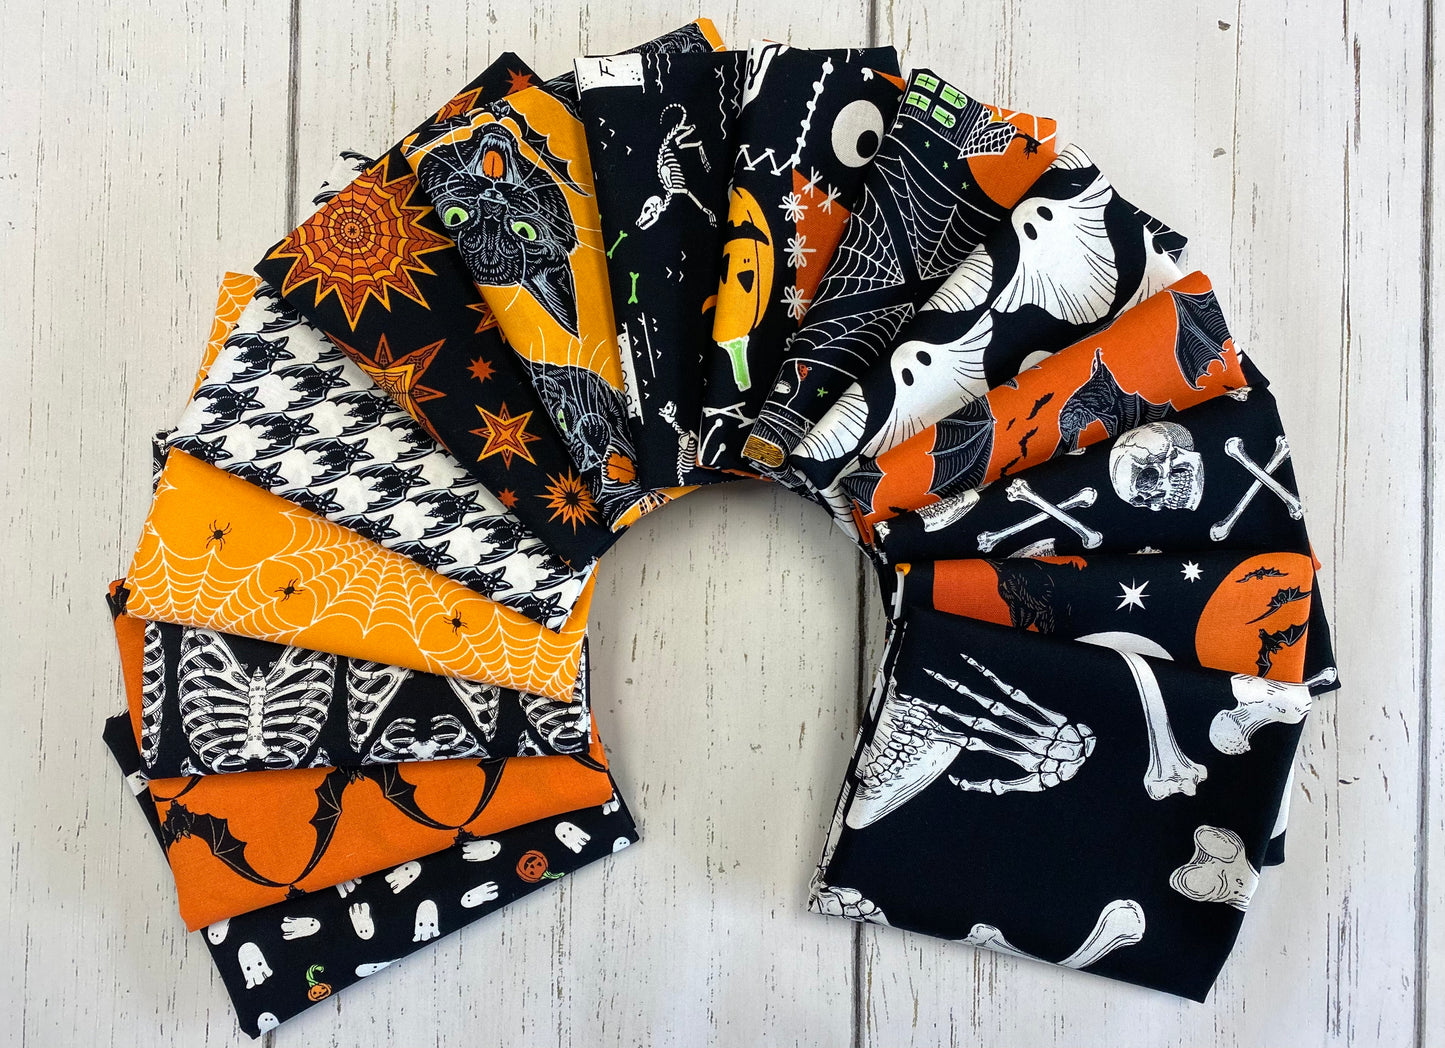 Scaredy Cat by Rachel Hauer Howl at the Moon    PWRH028.BLACK Cotton Woven Fabric